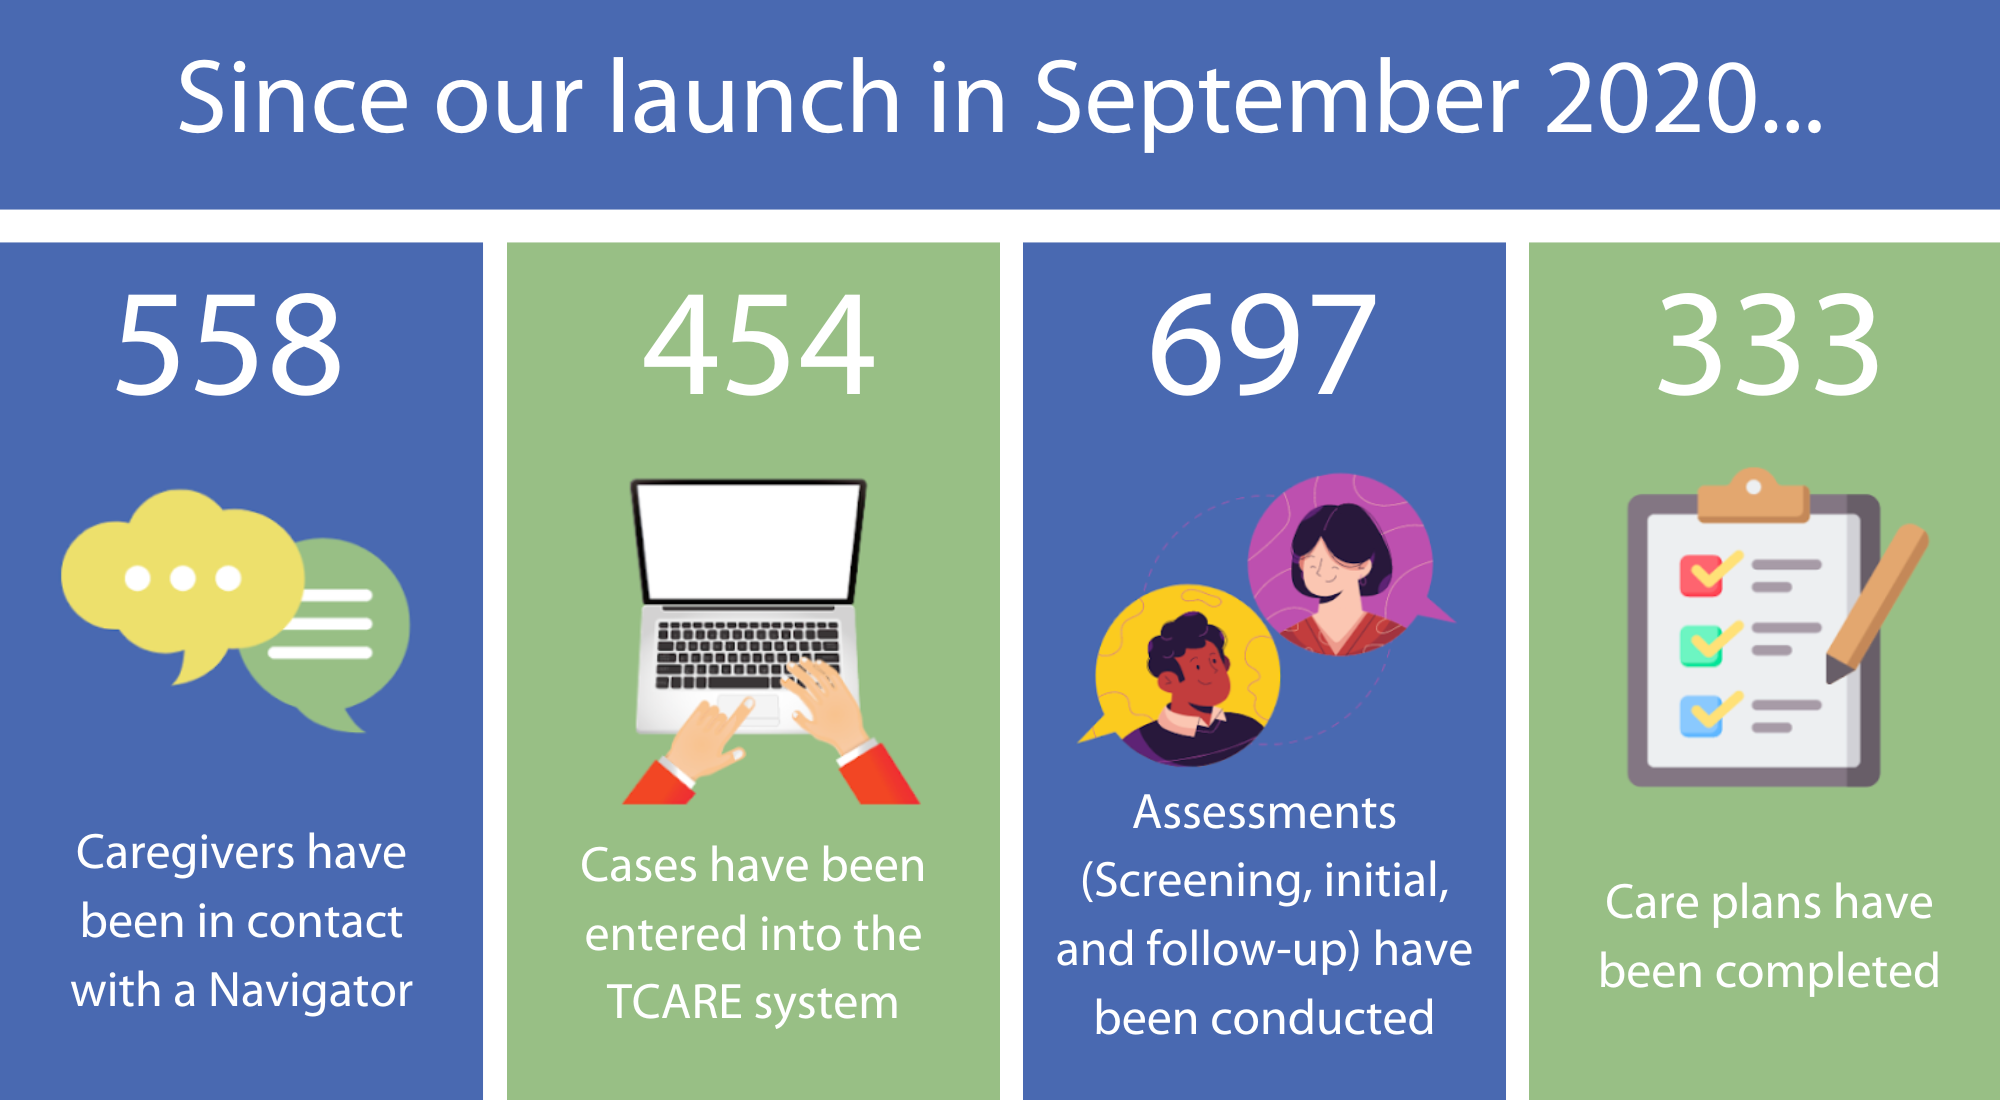 Image with a block across the top that reads "Since our launch in September 2020...". There are four more vertical chunks of information on the page sharing "558 Caregivers have been in contact with a navigator" with a chat bubble. "454 cases have been entered into the T-Care system" with a computer and hands typing. "697 assessments have been conducted" with floating heads. "333 Care plans have been completed" with a click board, paper, and pencil. 